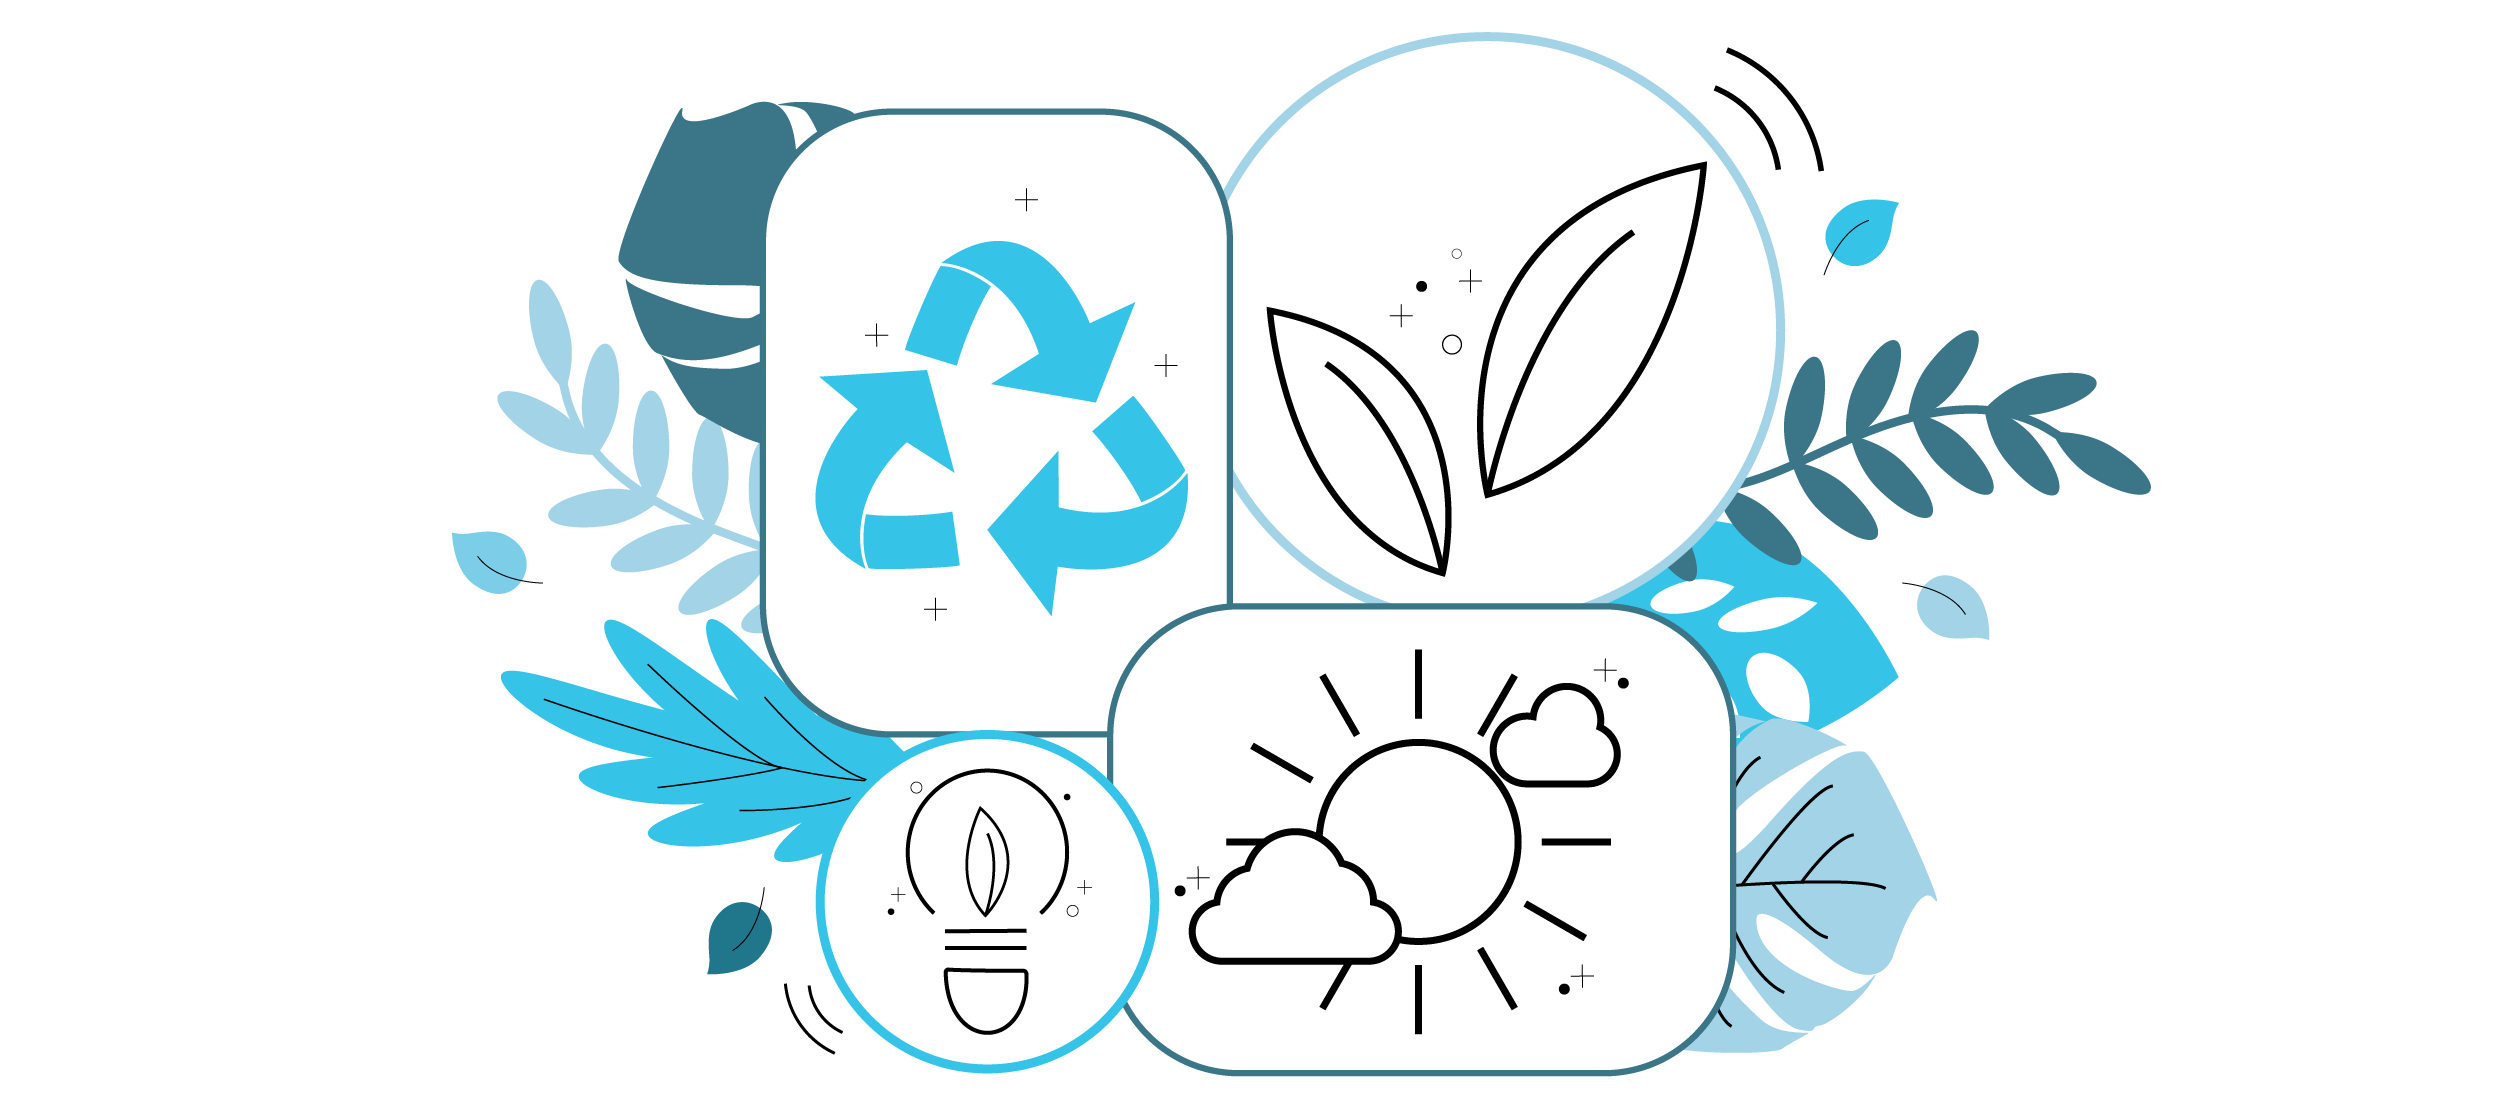 An illustration of a collage of energy-related icons.